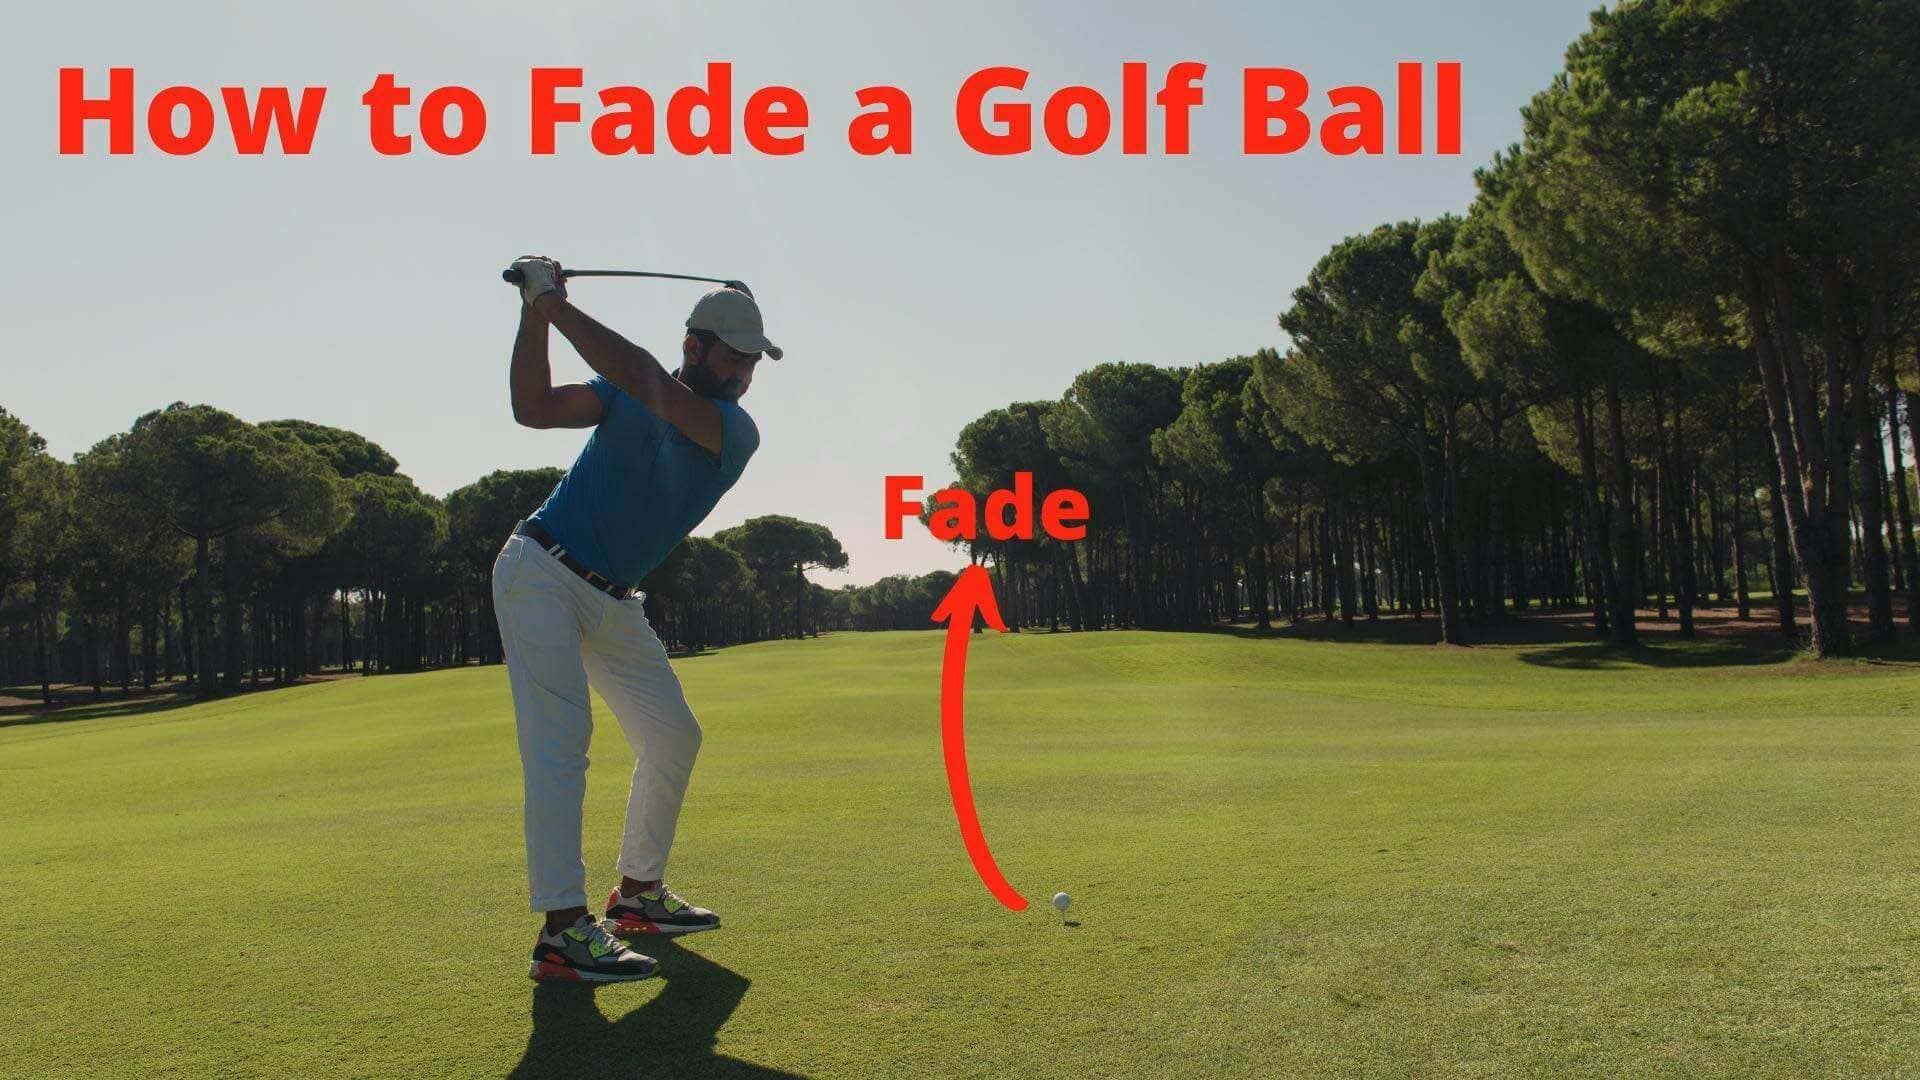 A fade is a golf shot where the ball curves to the right in the air from left to right or from right to left when one is a left-handed golfer.